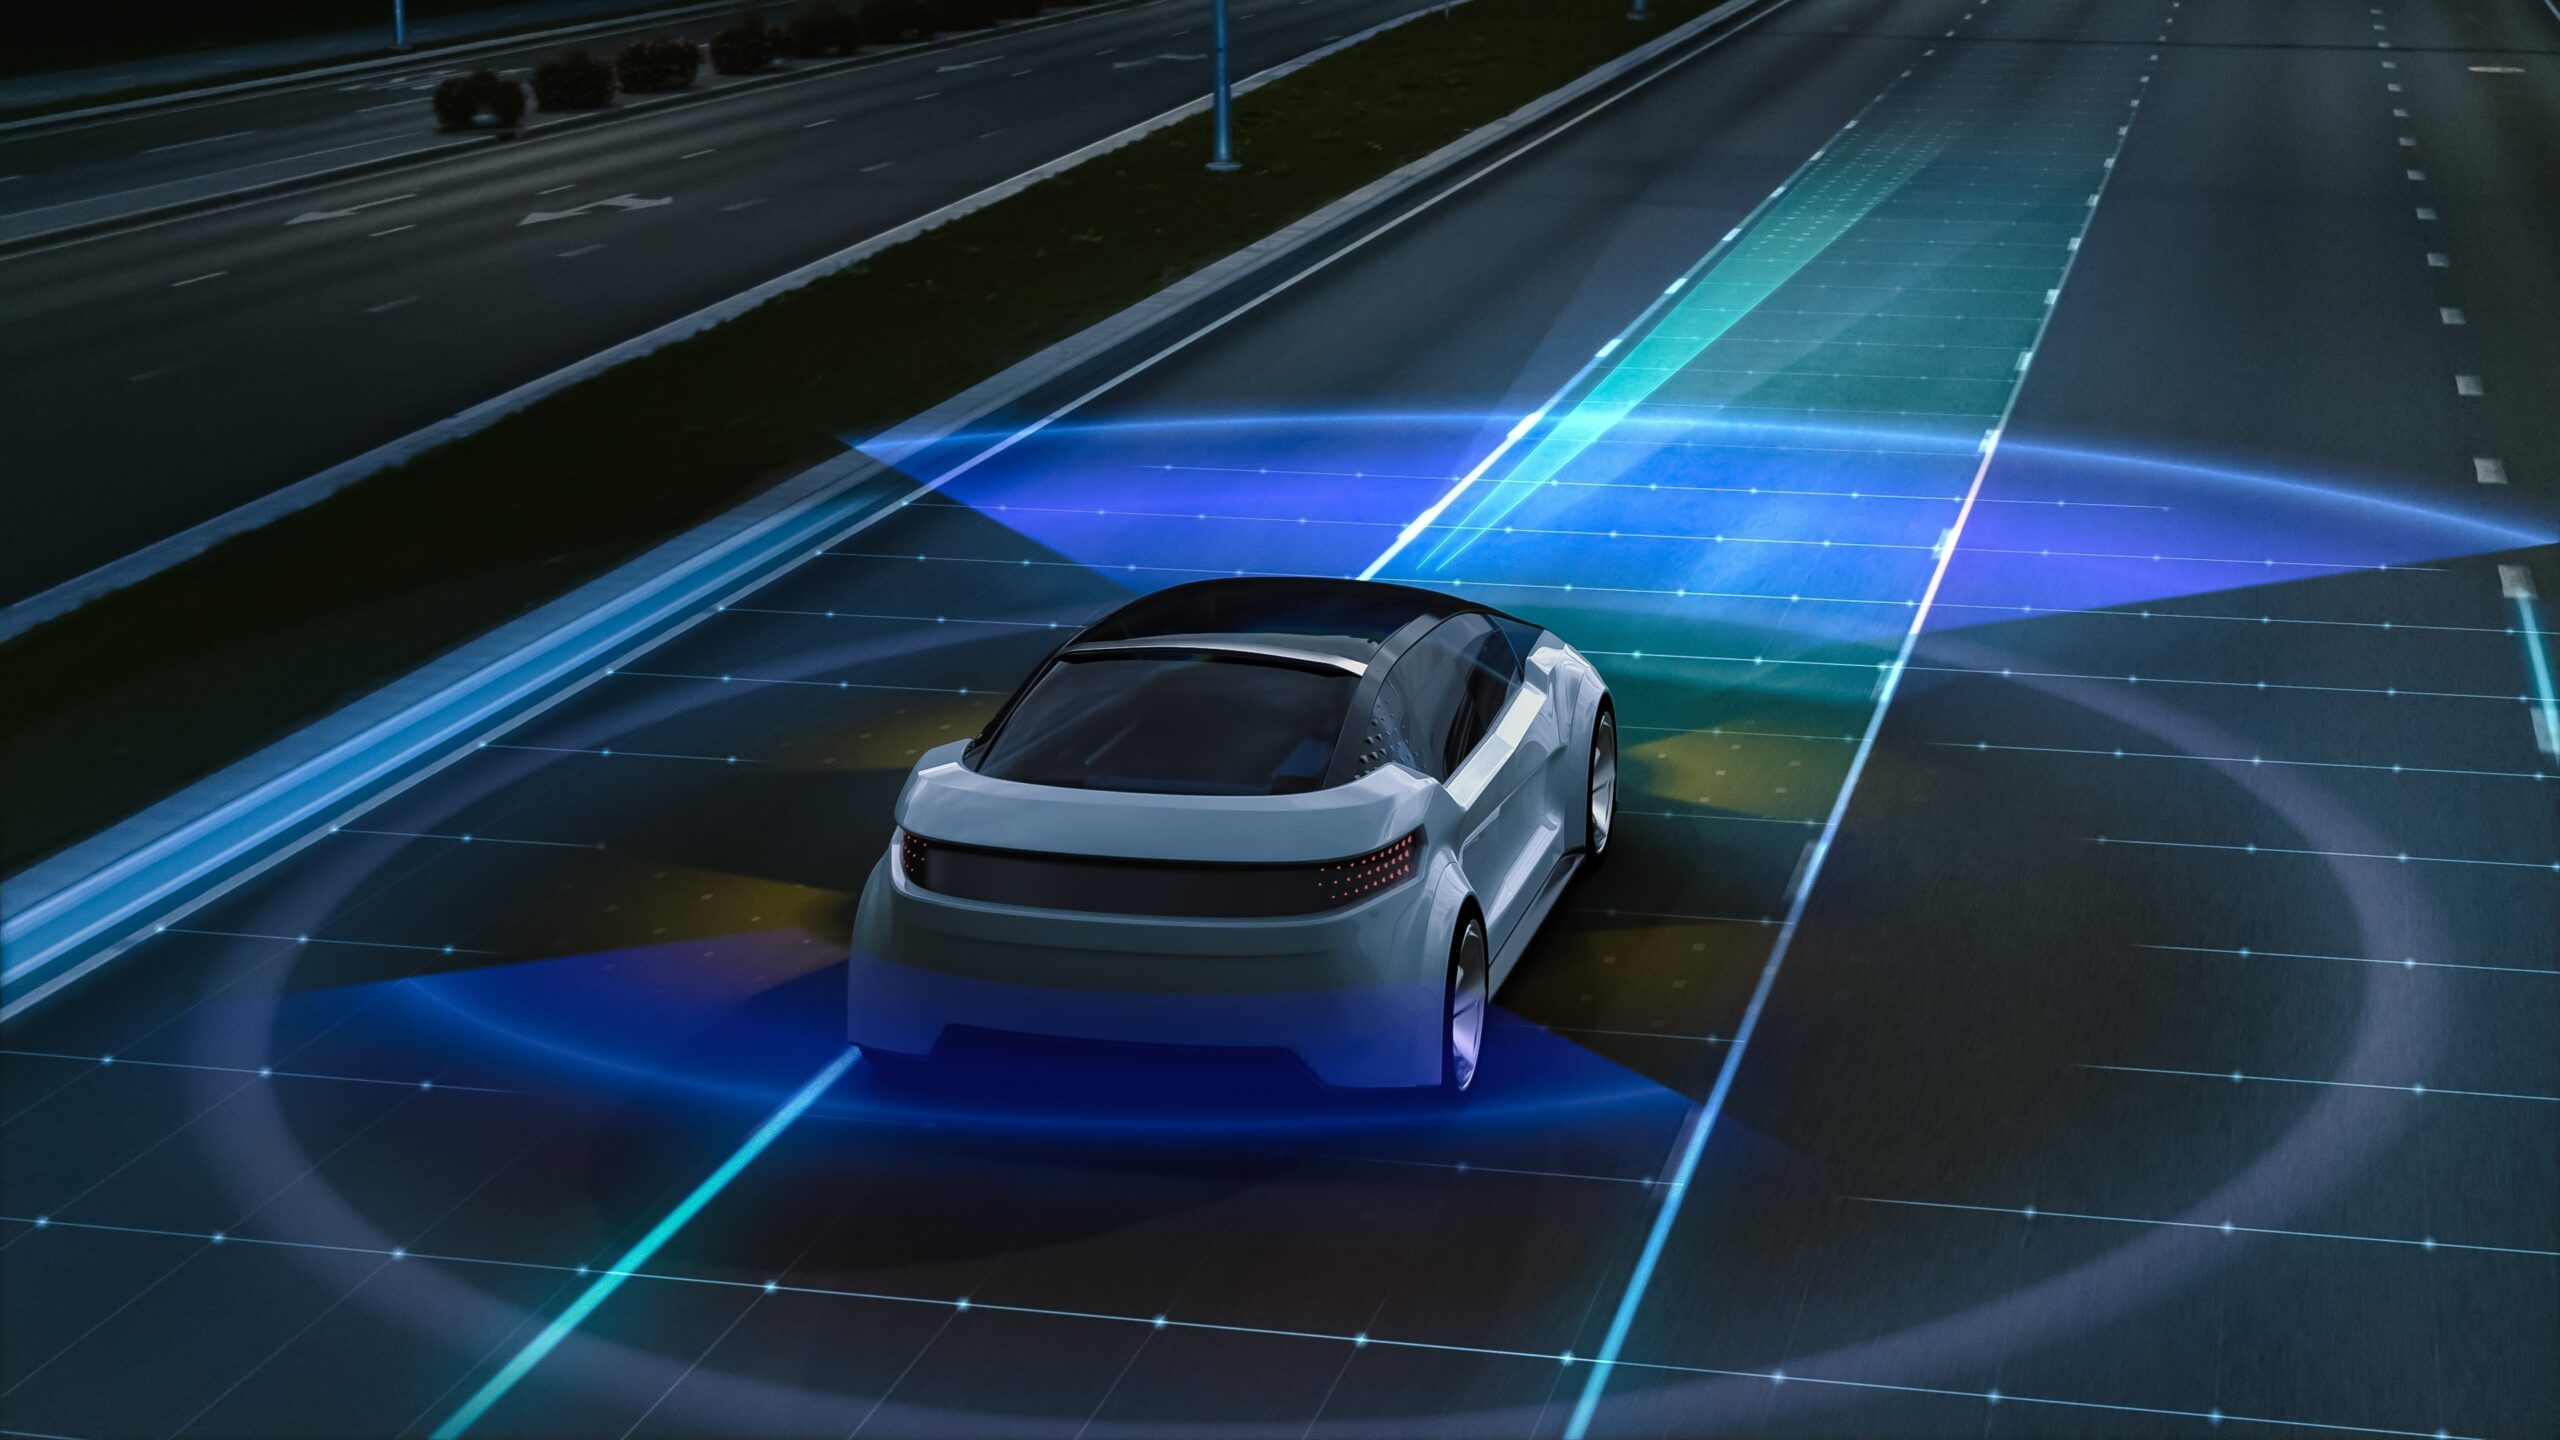 Autonomous vehicles running on the roads are expected to reach 58 million by 2030